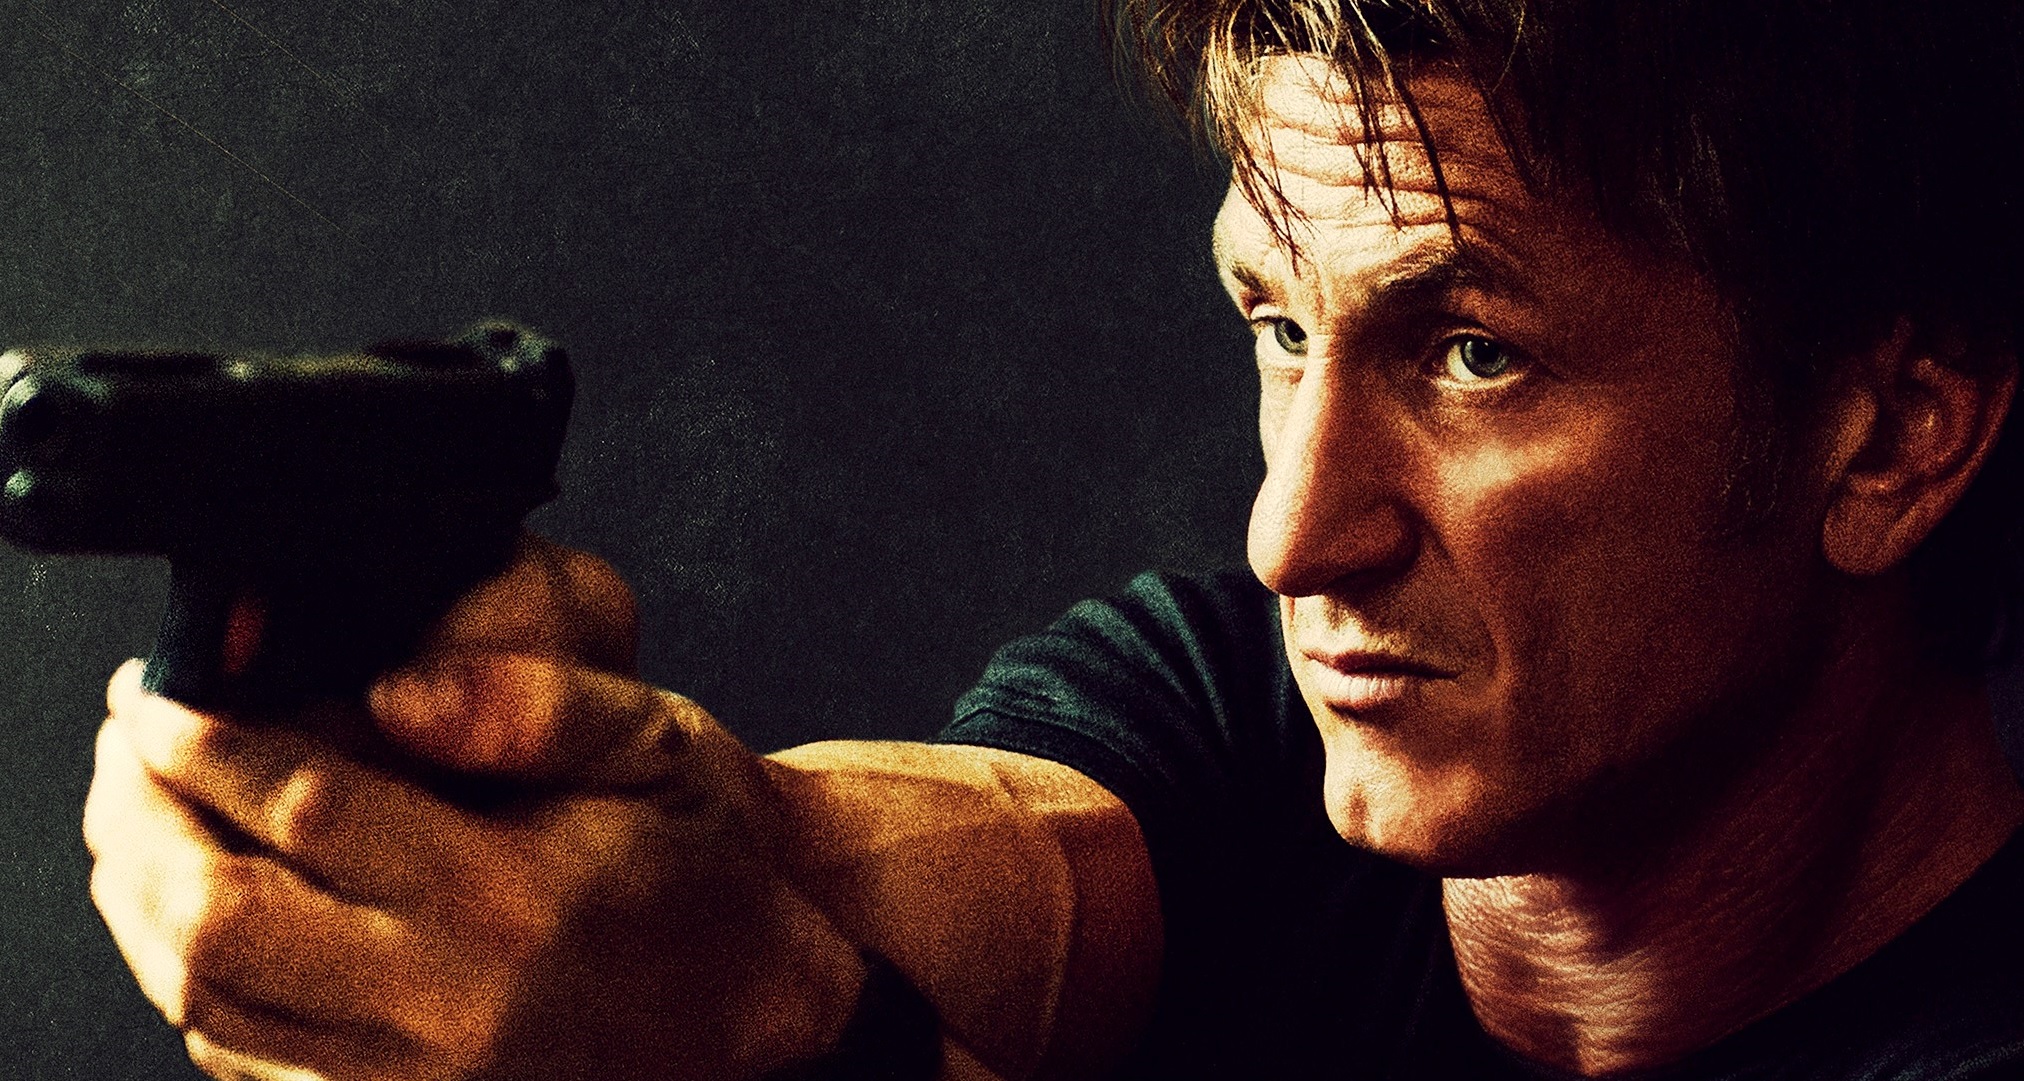 Nice Images Collection: The Gunman Desktop Wallpapers